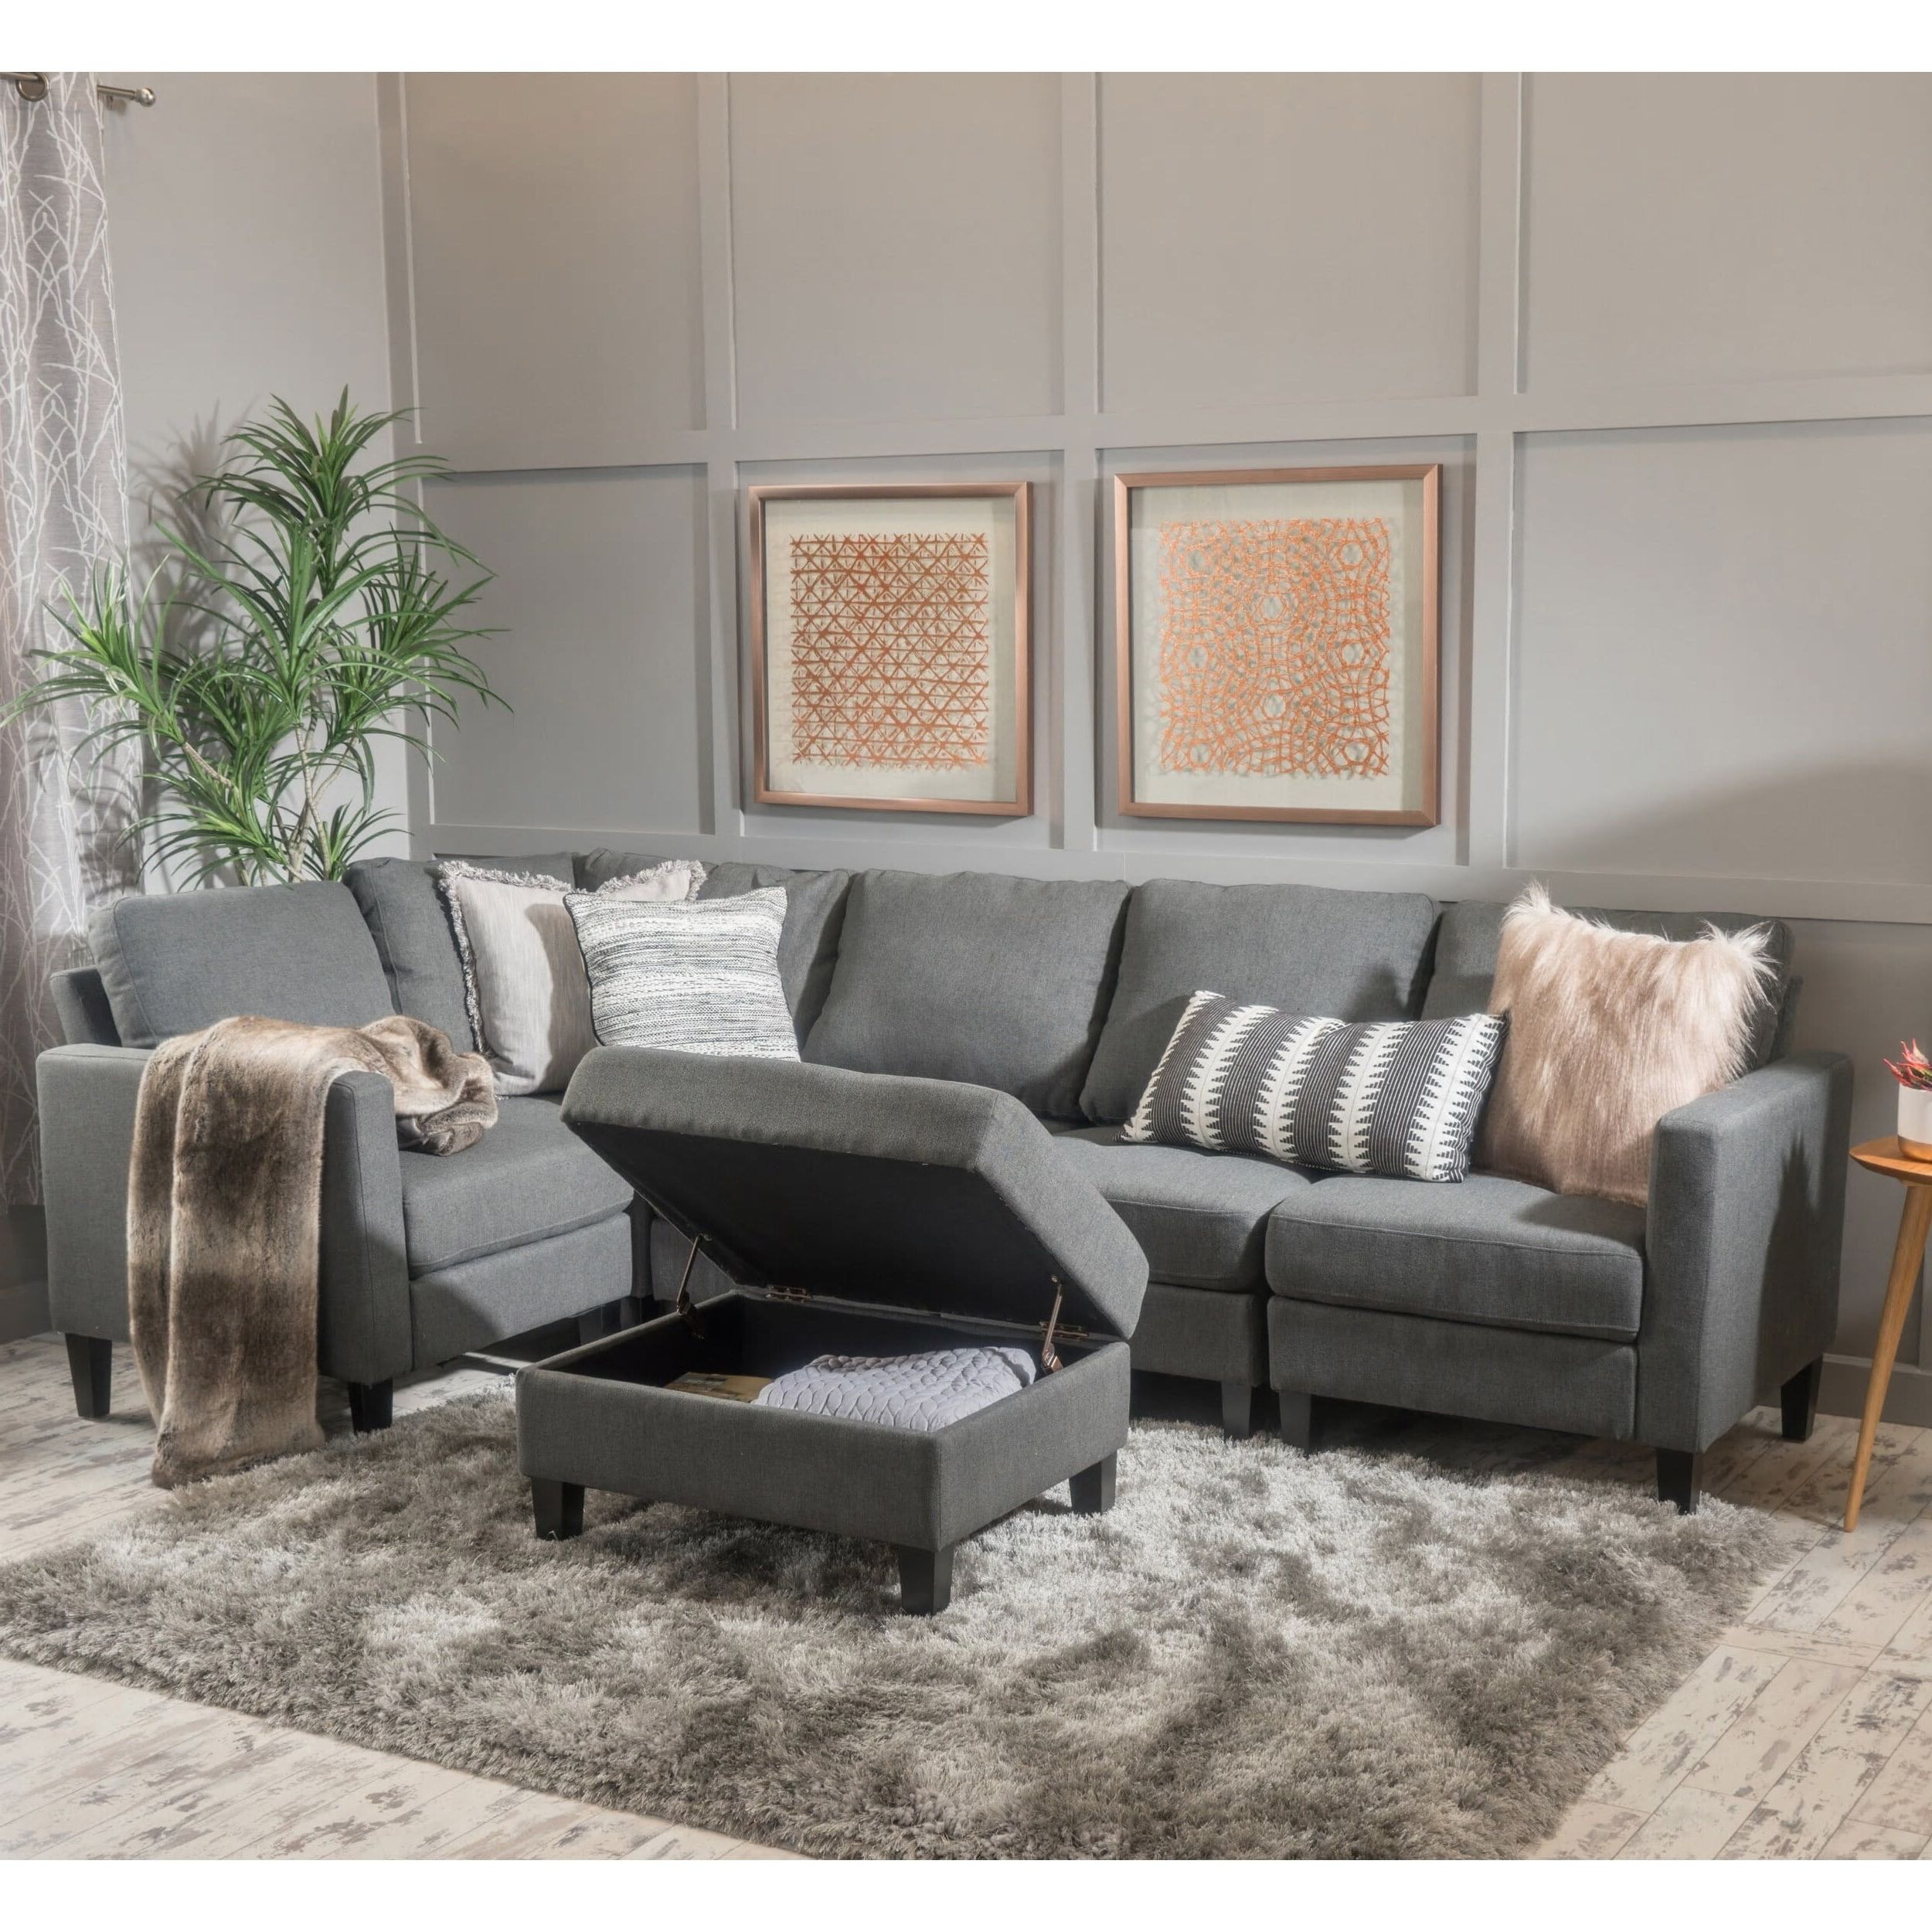 Christopher Knight Home Zahra 6 Piece Sofa Sectional With Storage With Sofas With Ottomans (Gallery 5 of 20)